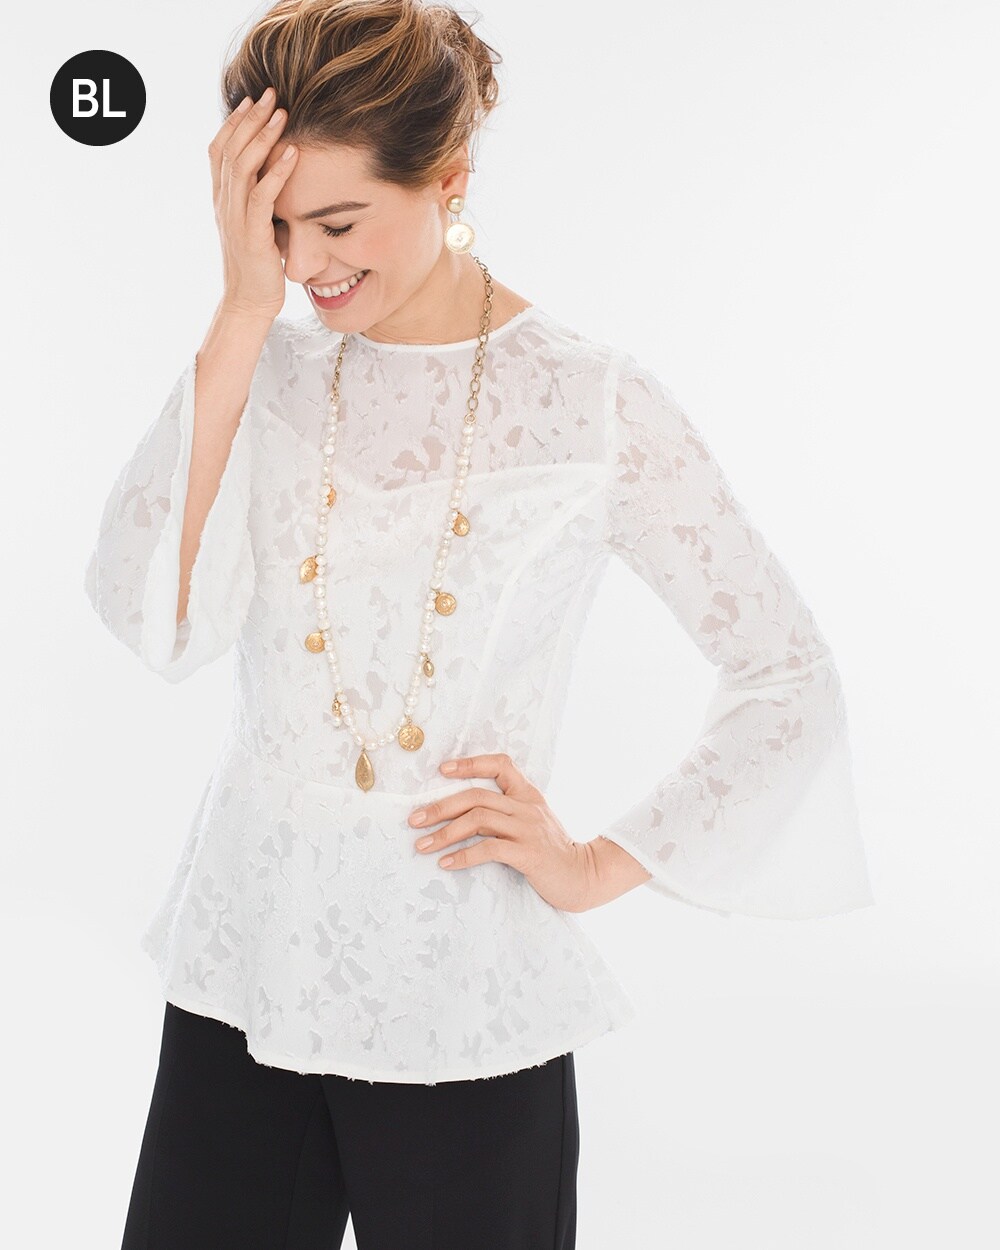 Black Label Bell-Sleeve Lace Top